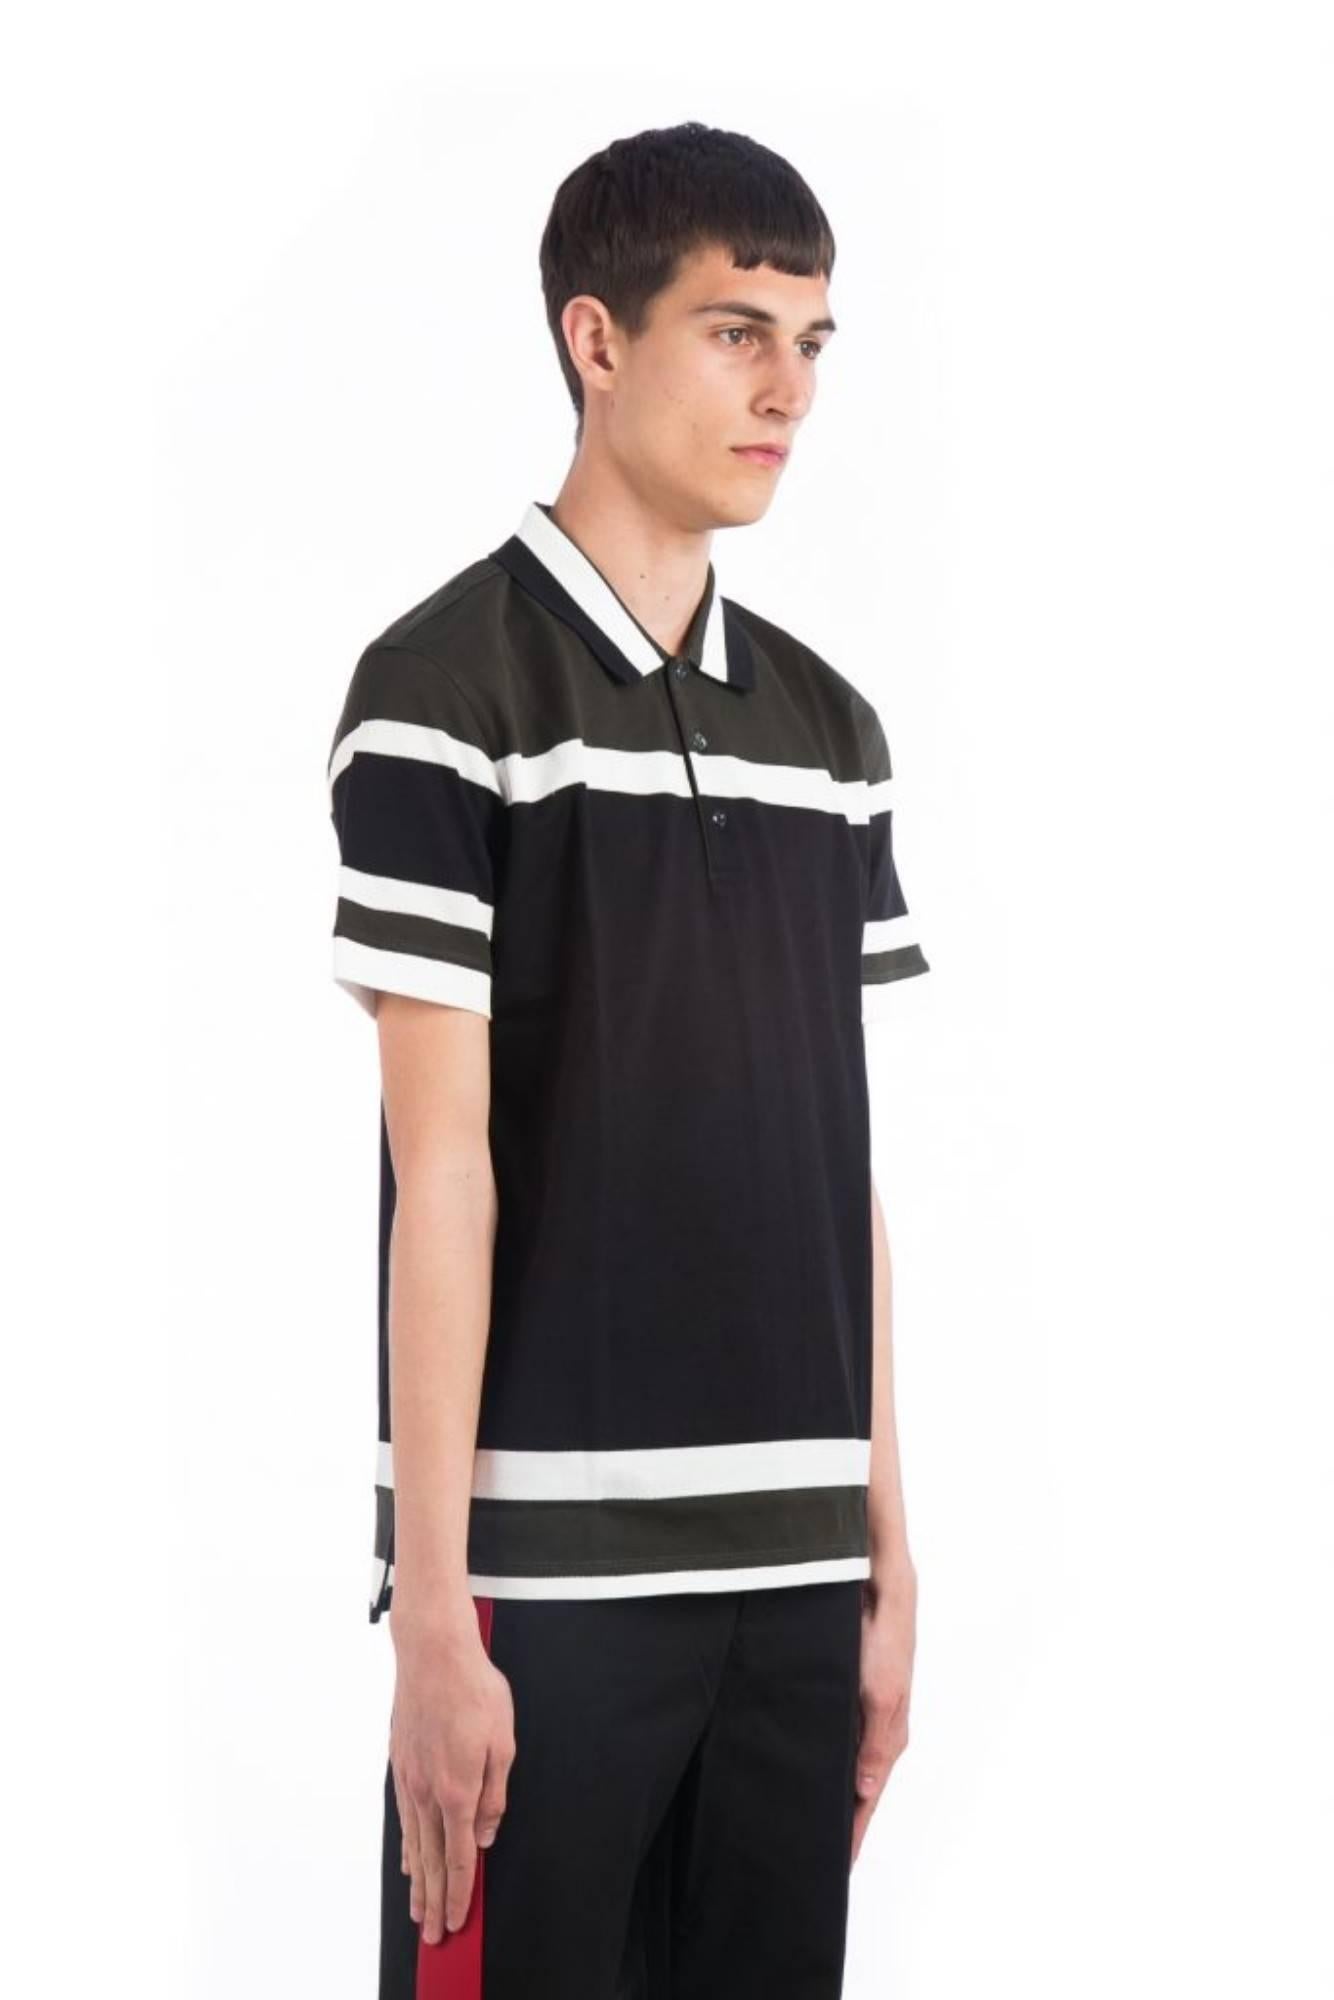 Paneled Polo Shirt
Black white and green polo shirt
Cuban fit
Paneled colour block design
Classic polo collar
Front button placket
Short sleeves
Composition 100% cotton